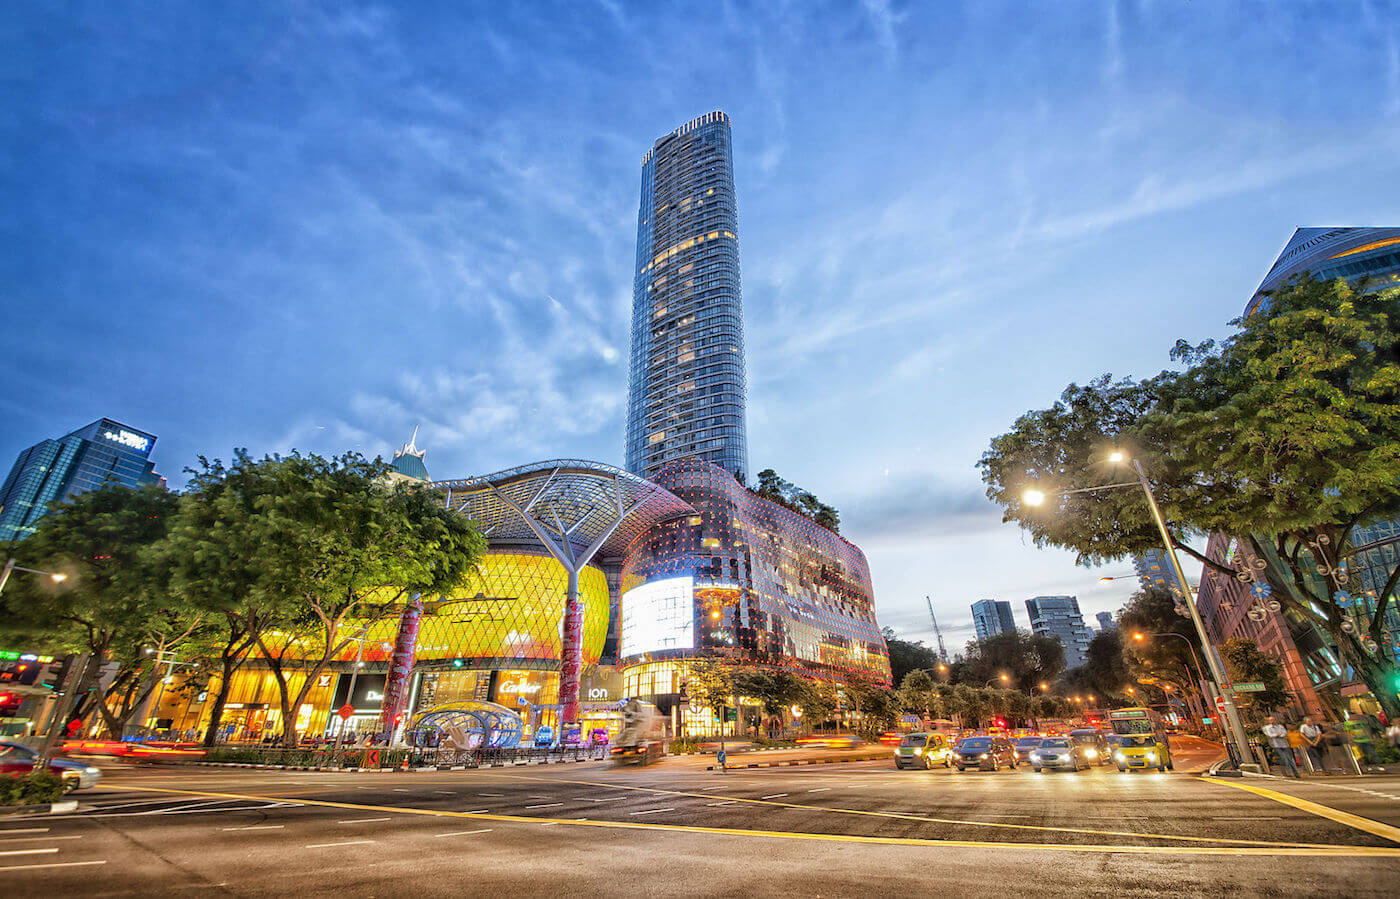 ION Orchard on Orchard Road. Source: Chen Si Yuan